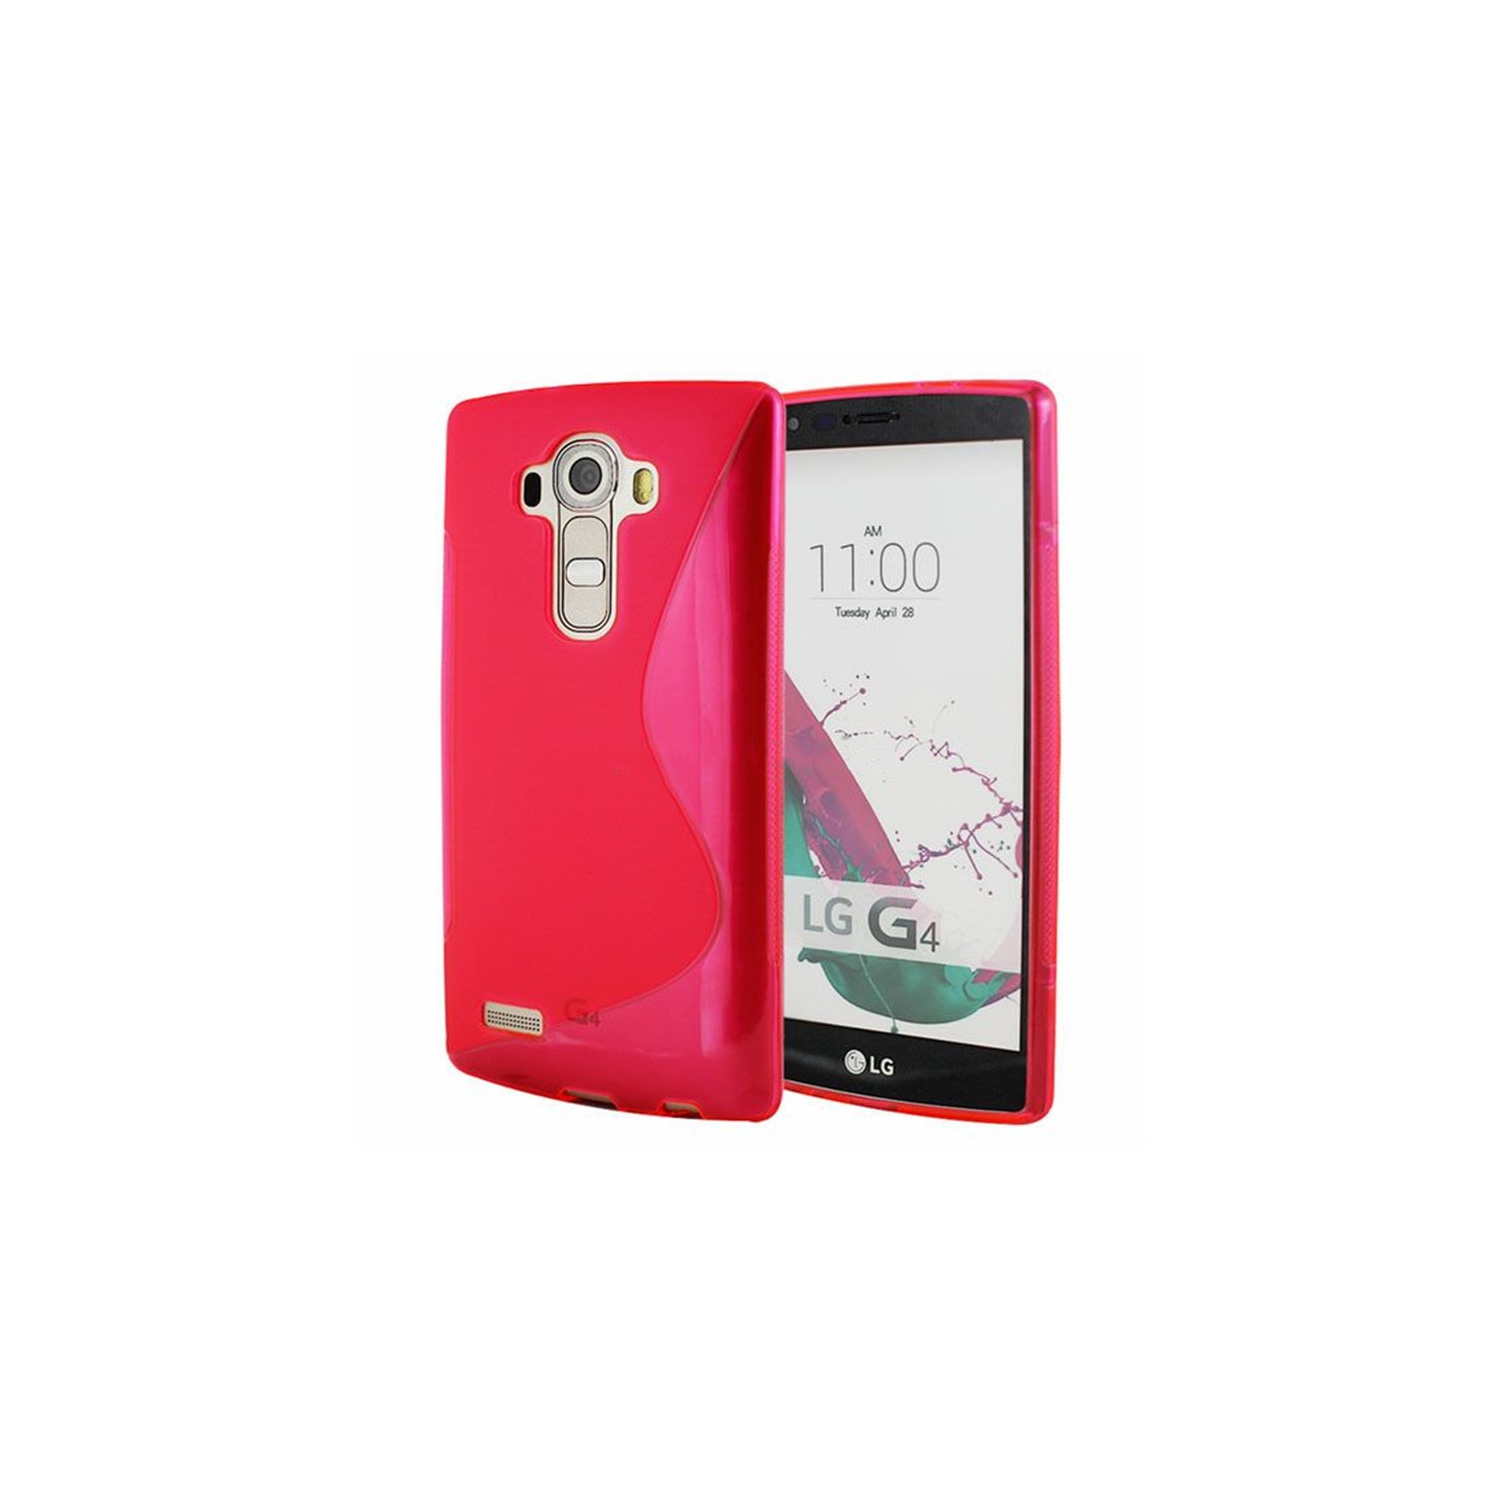 【CSmart】 Ultra Thin Soft TPU Silicone Jelly Bumper Back Cover Case for LG G4, Hot Pink